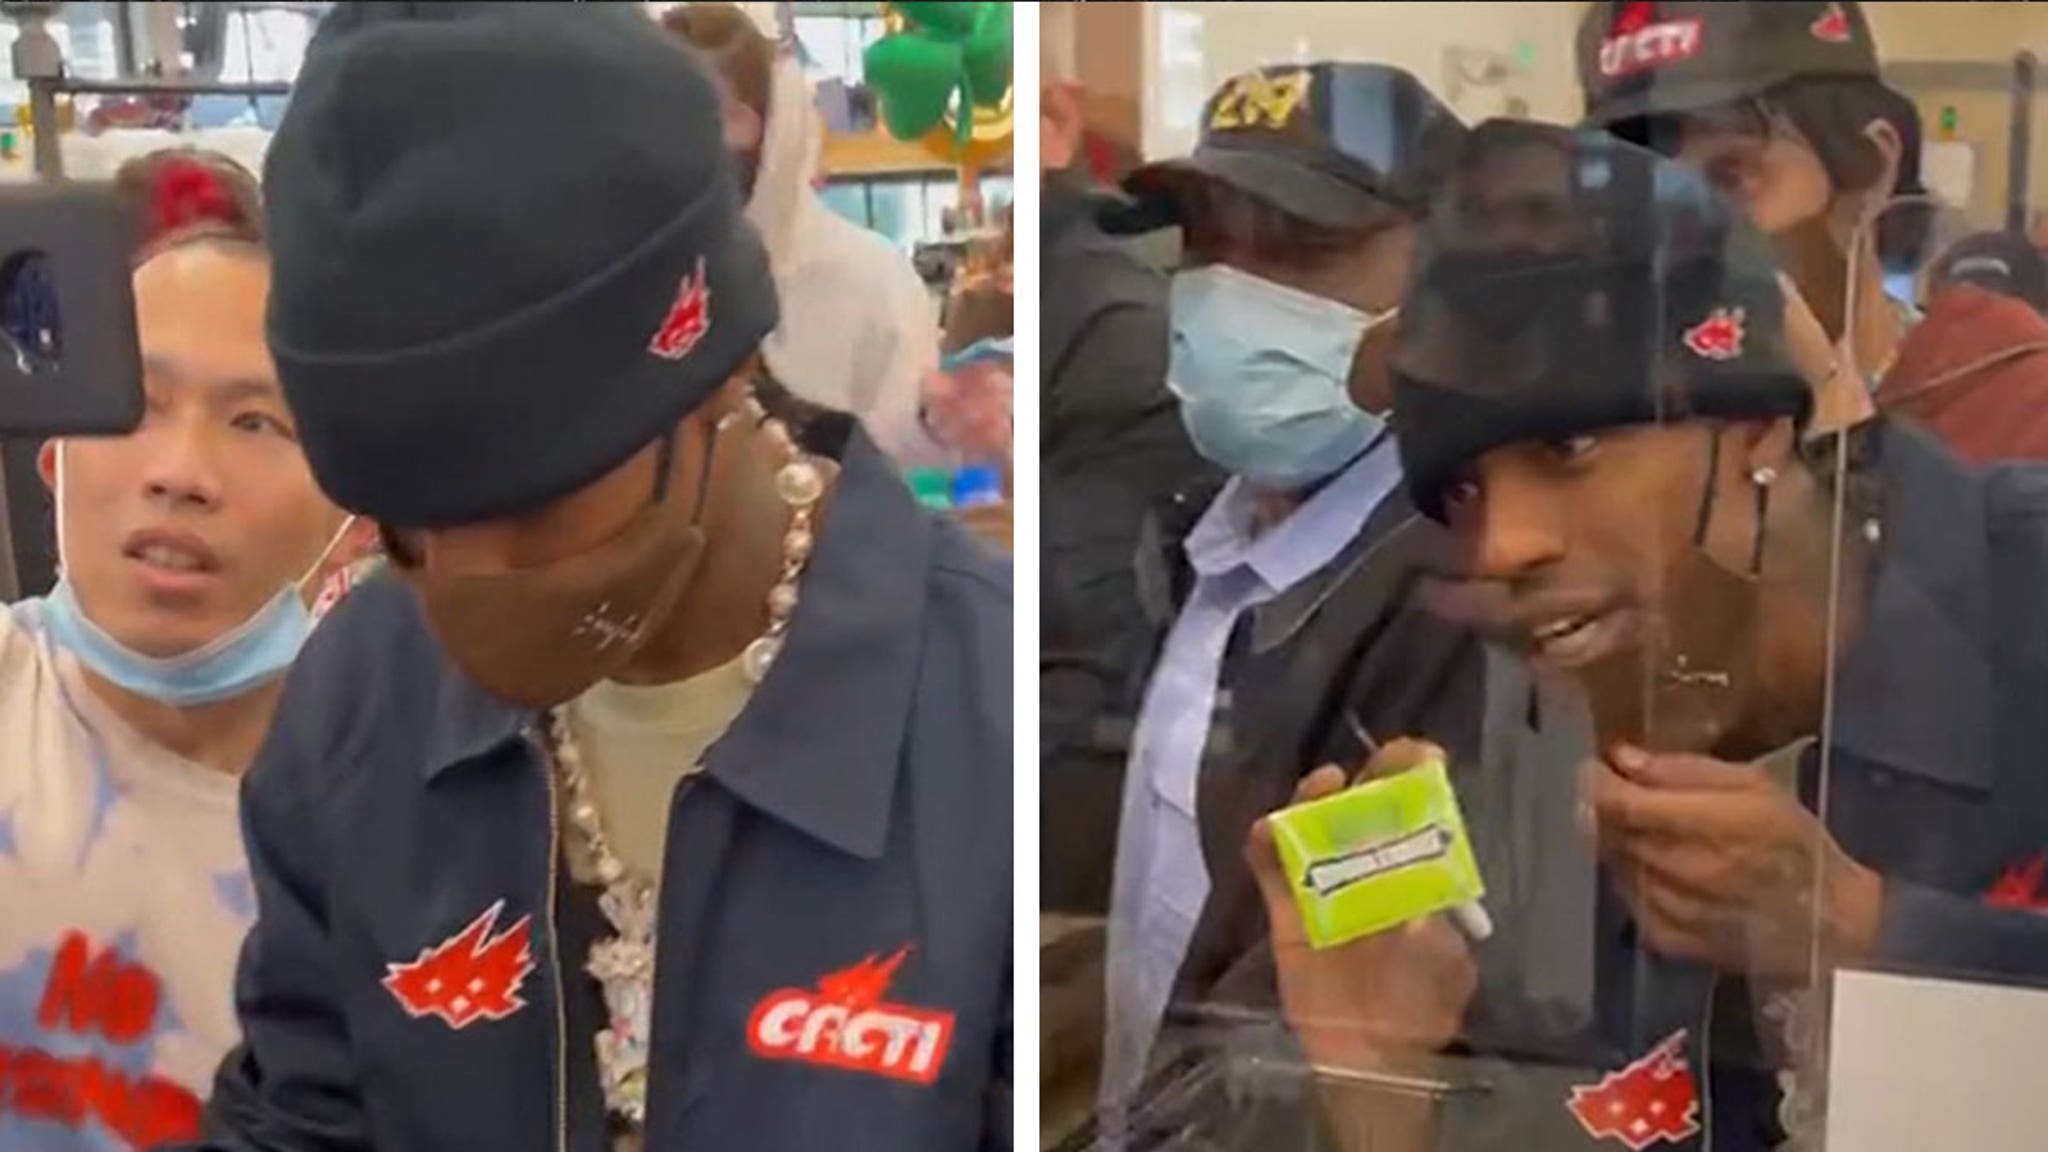 Travis Scott causes a chaotic scene at the grocery store